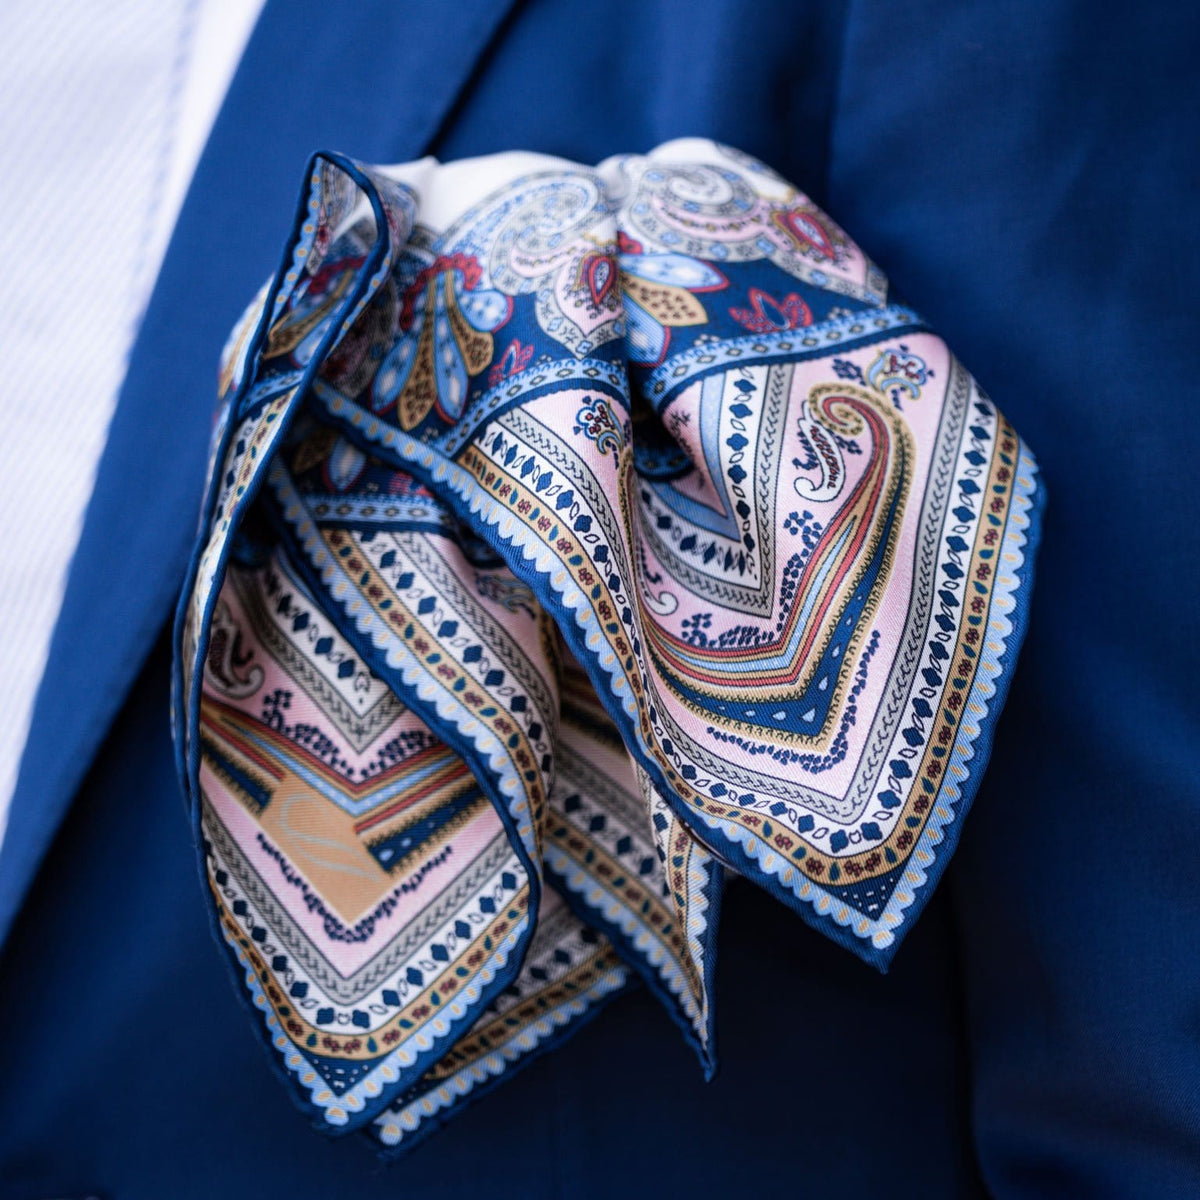 Luxury printed silk pocket square made in Italy